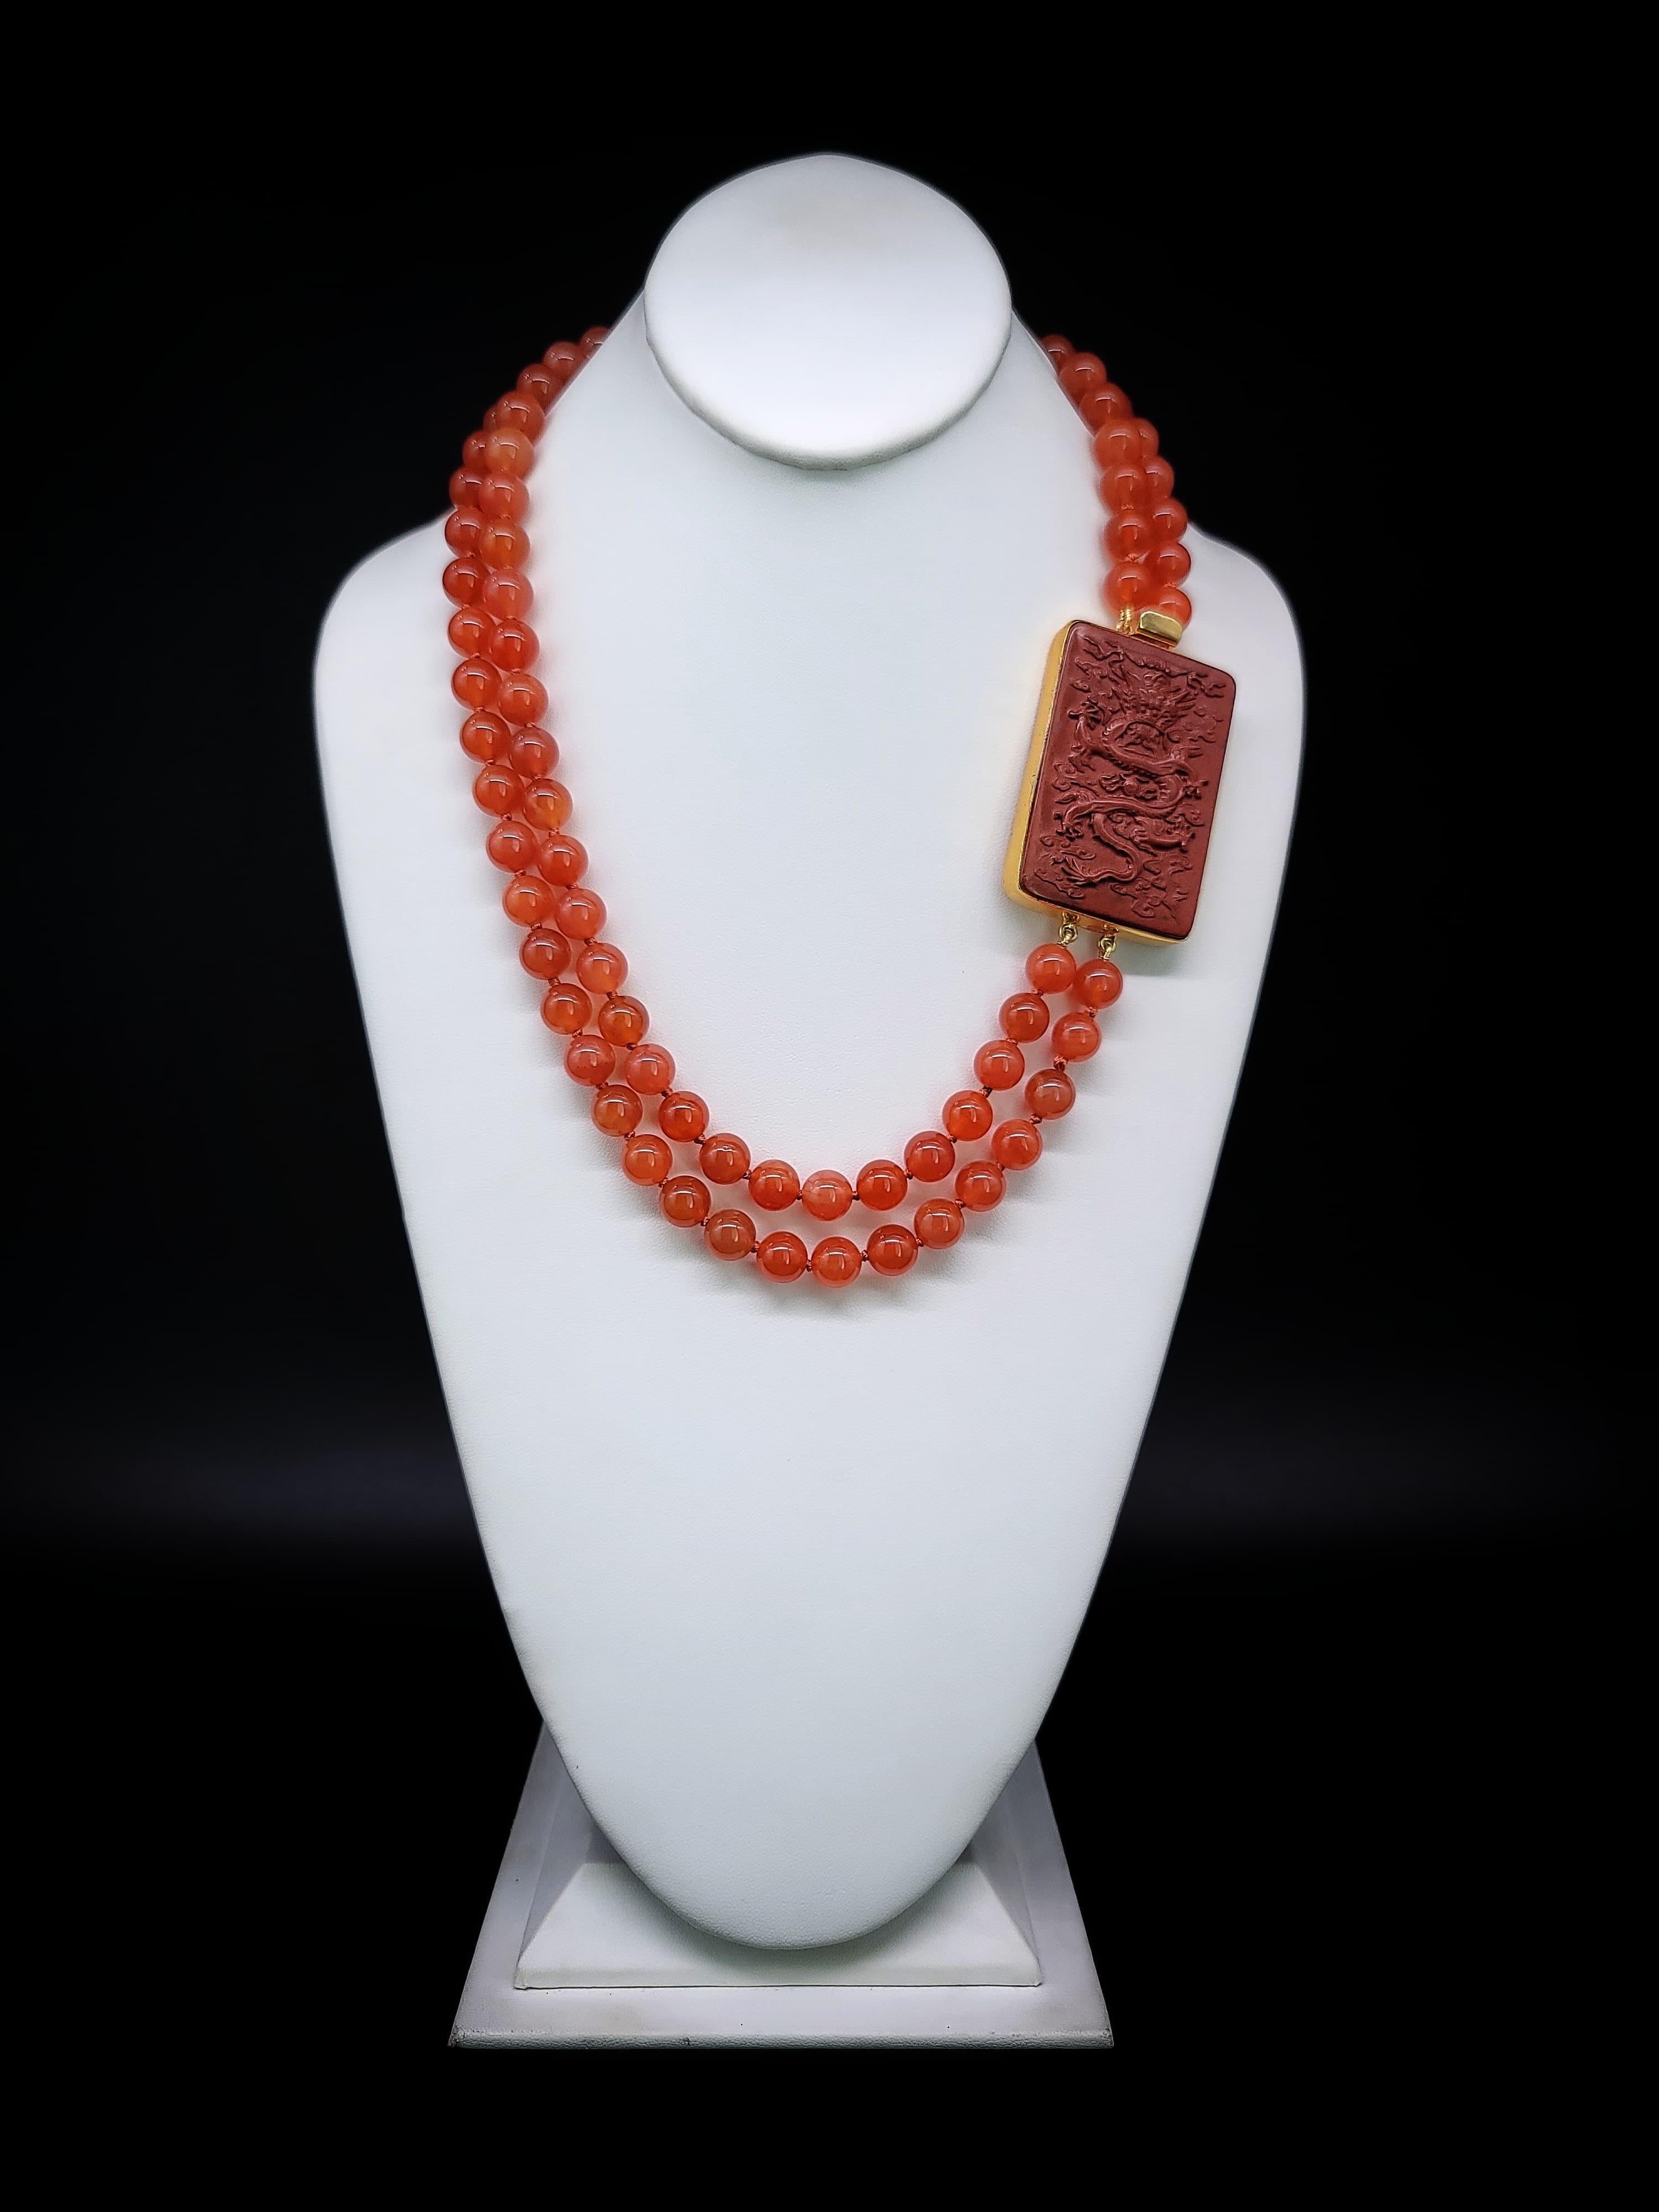 A.Jeschel Polished Chalcedony beads necklace with a signature clasp.